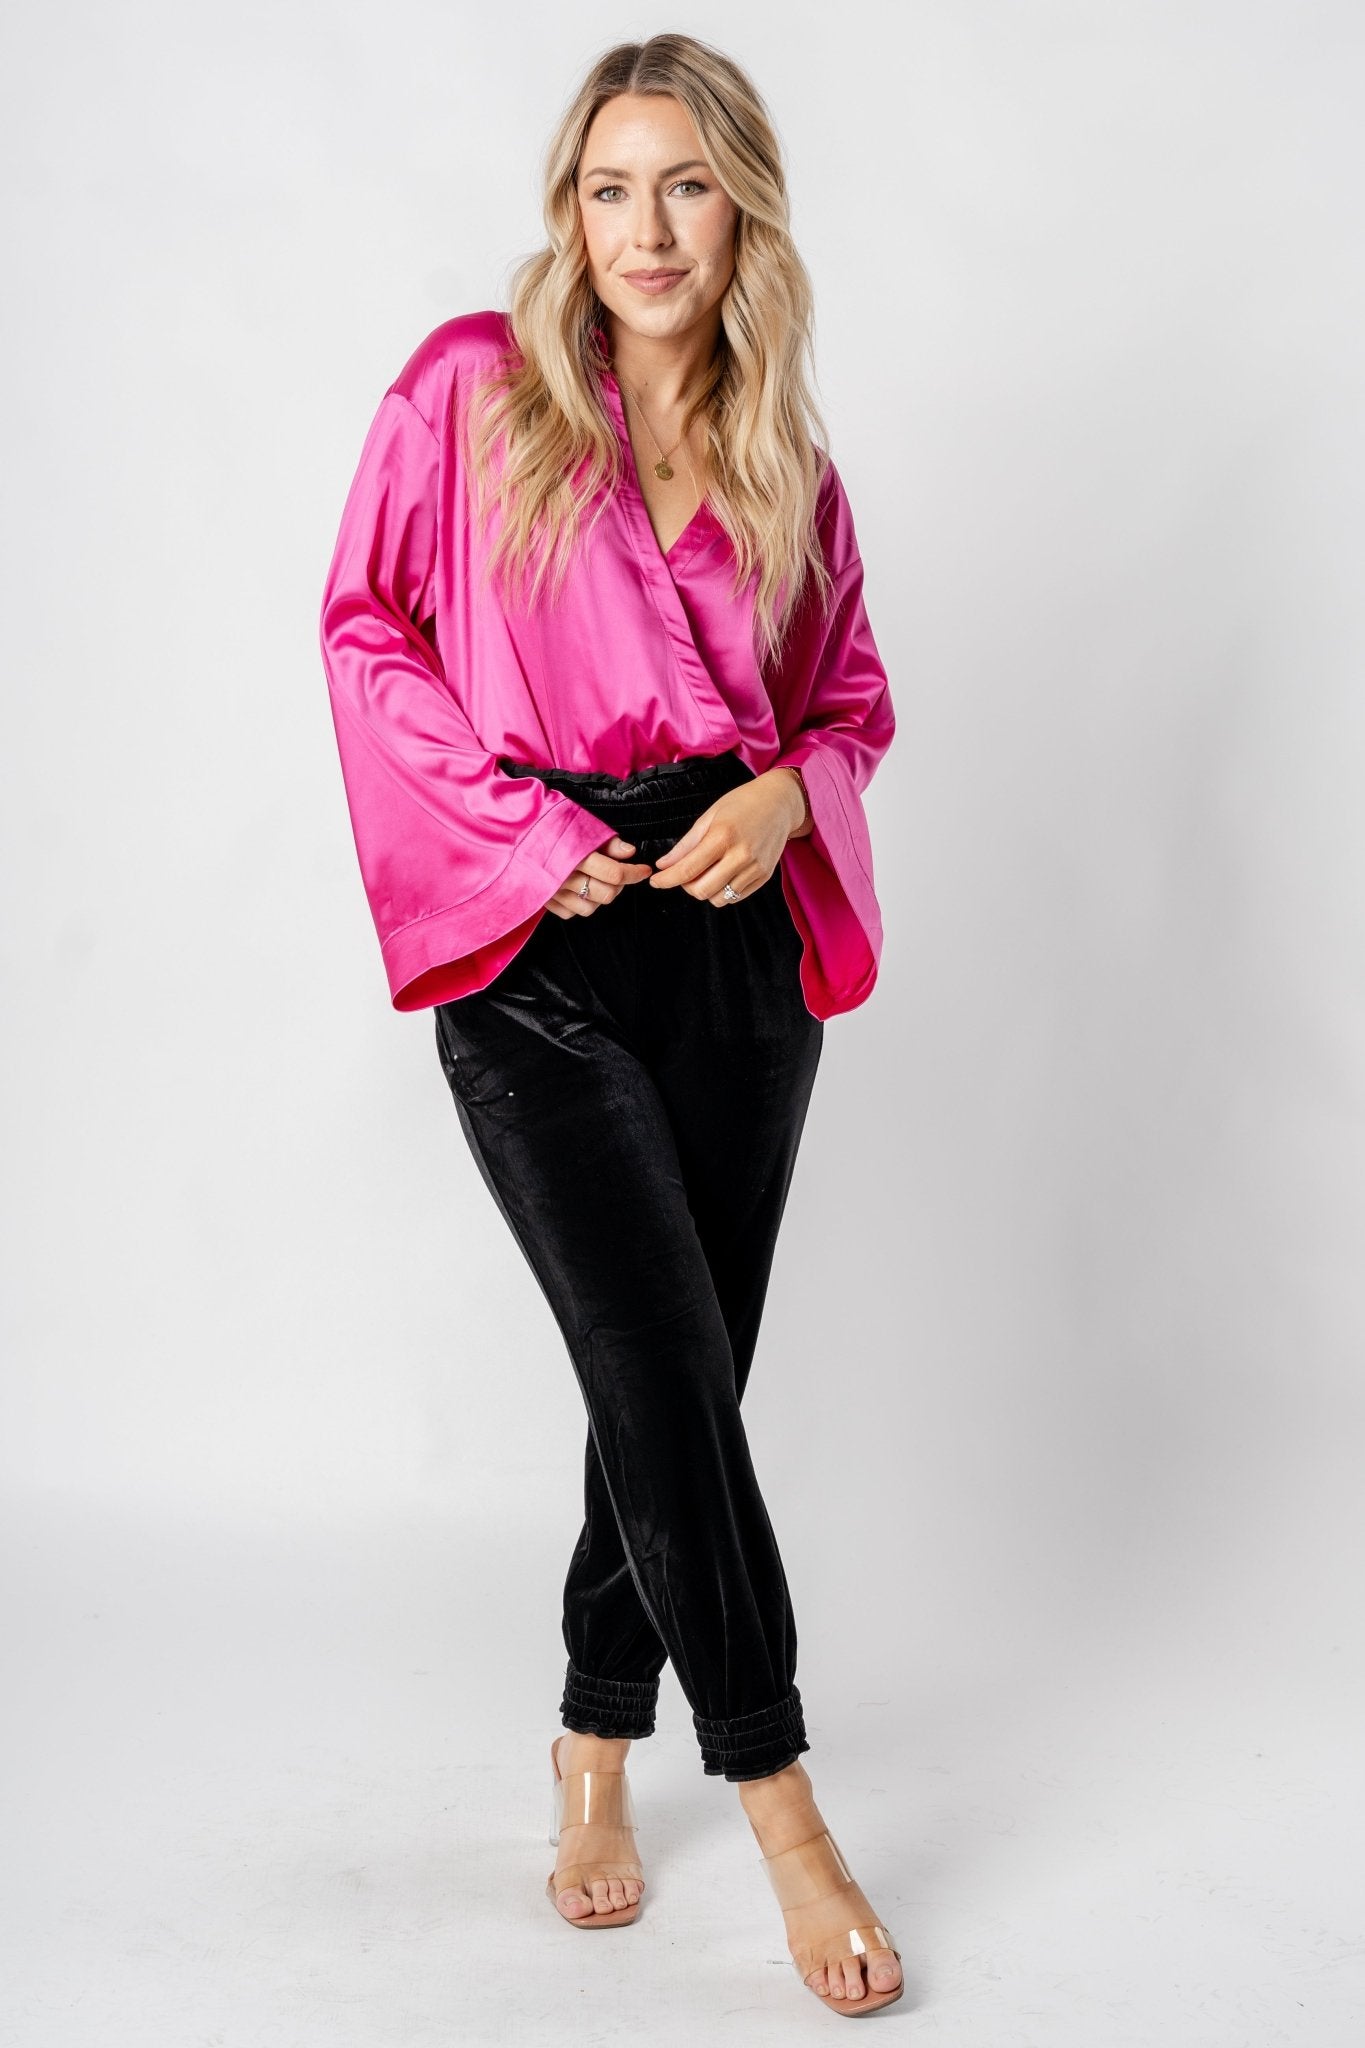 Velvet jogger pants black - Affordable New Year's Eve Party Outfits at Lush Fashion Lounge Boutique in Oklahoma City